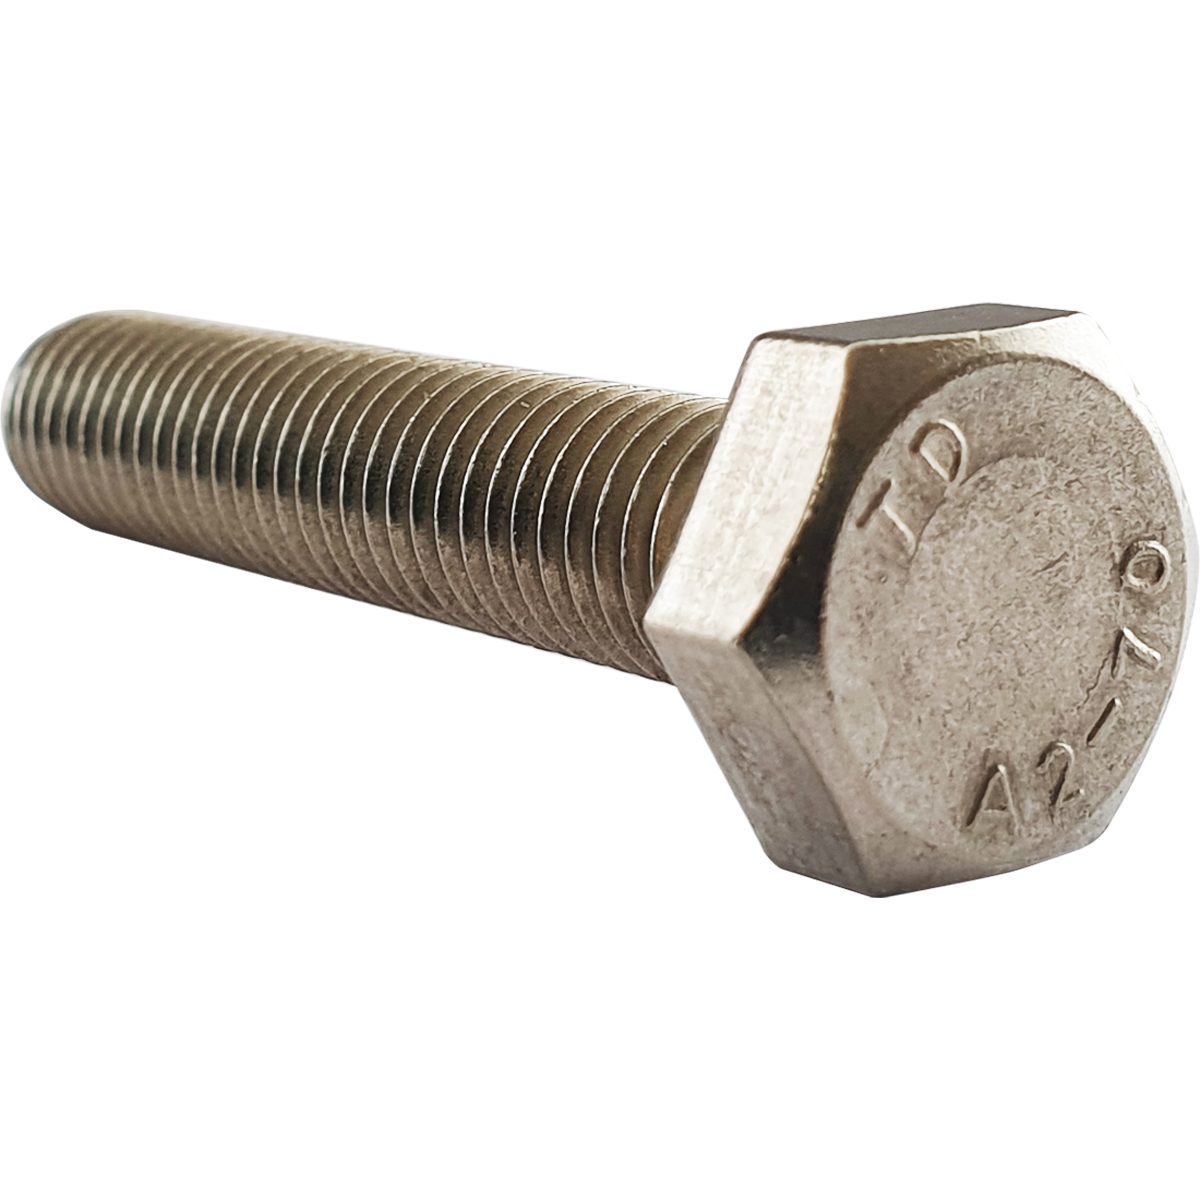 UNF A2 stainless steel fully threaded hex set screw. Corrosion resistant and available in a variety of sizes.